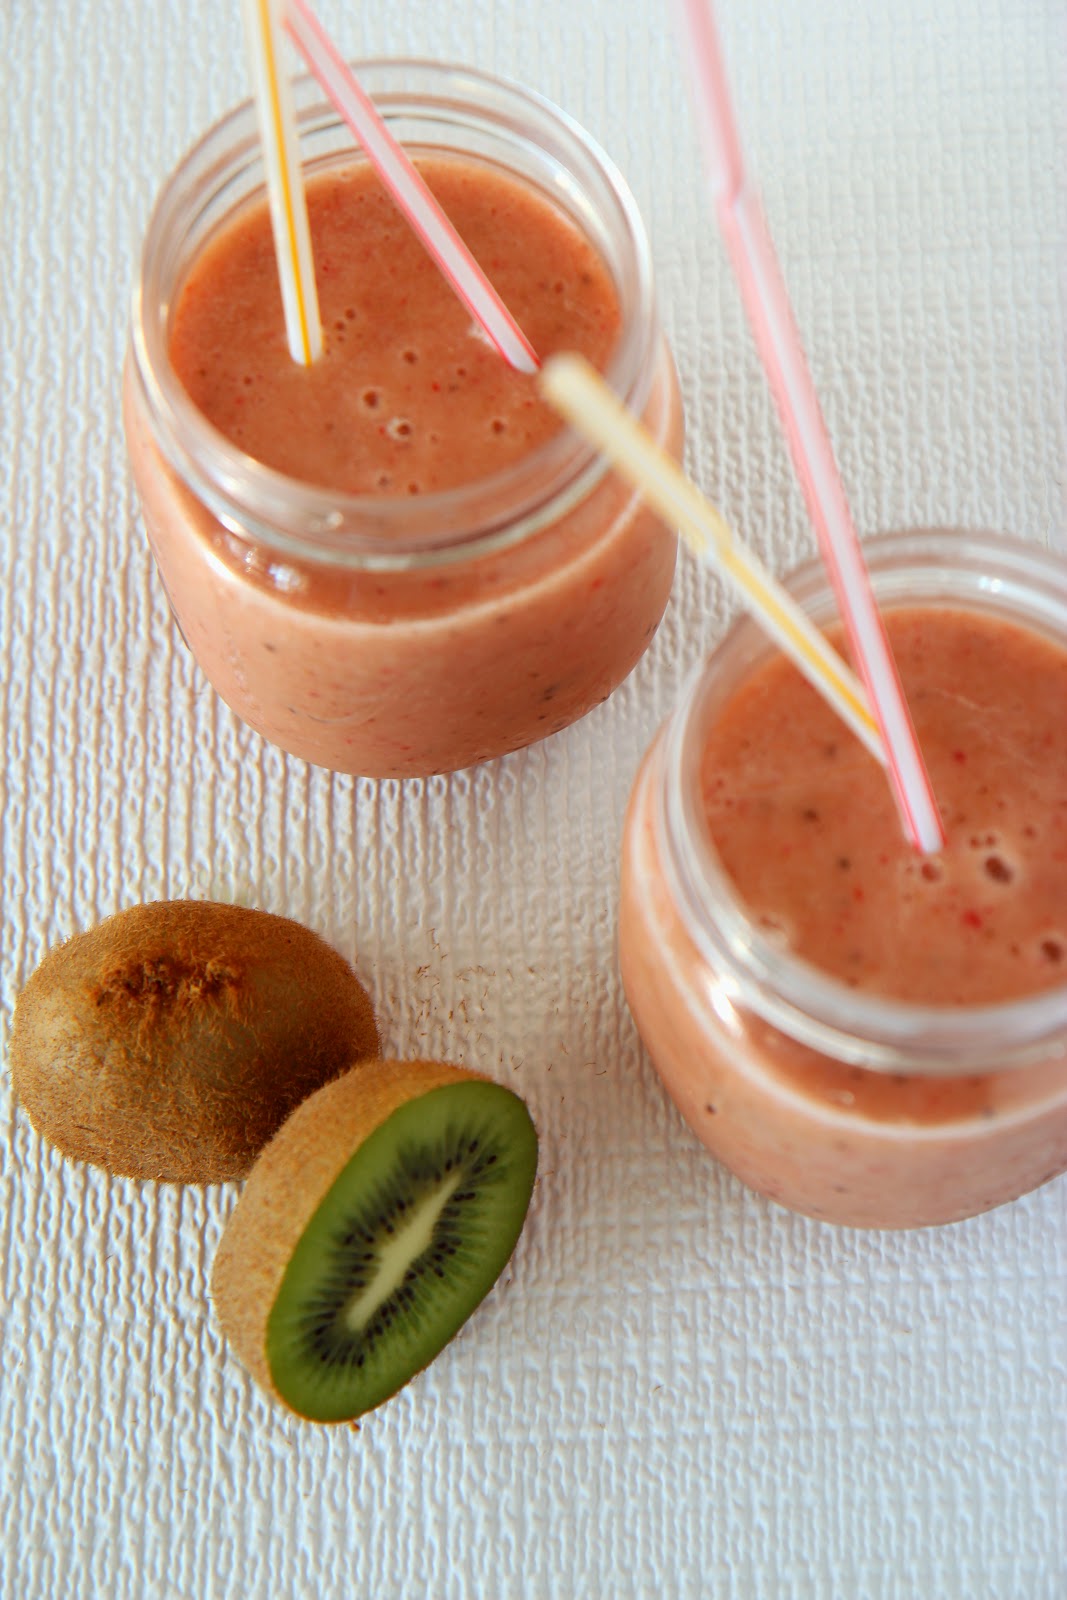 Jump-start a healthy New Year with these easy smoothie recipes for all dietary preferences!